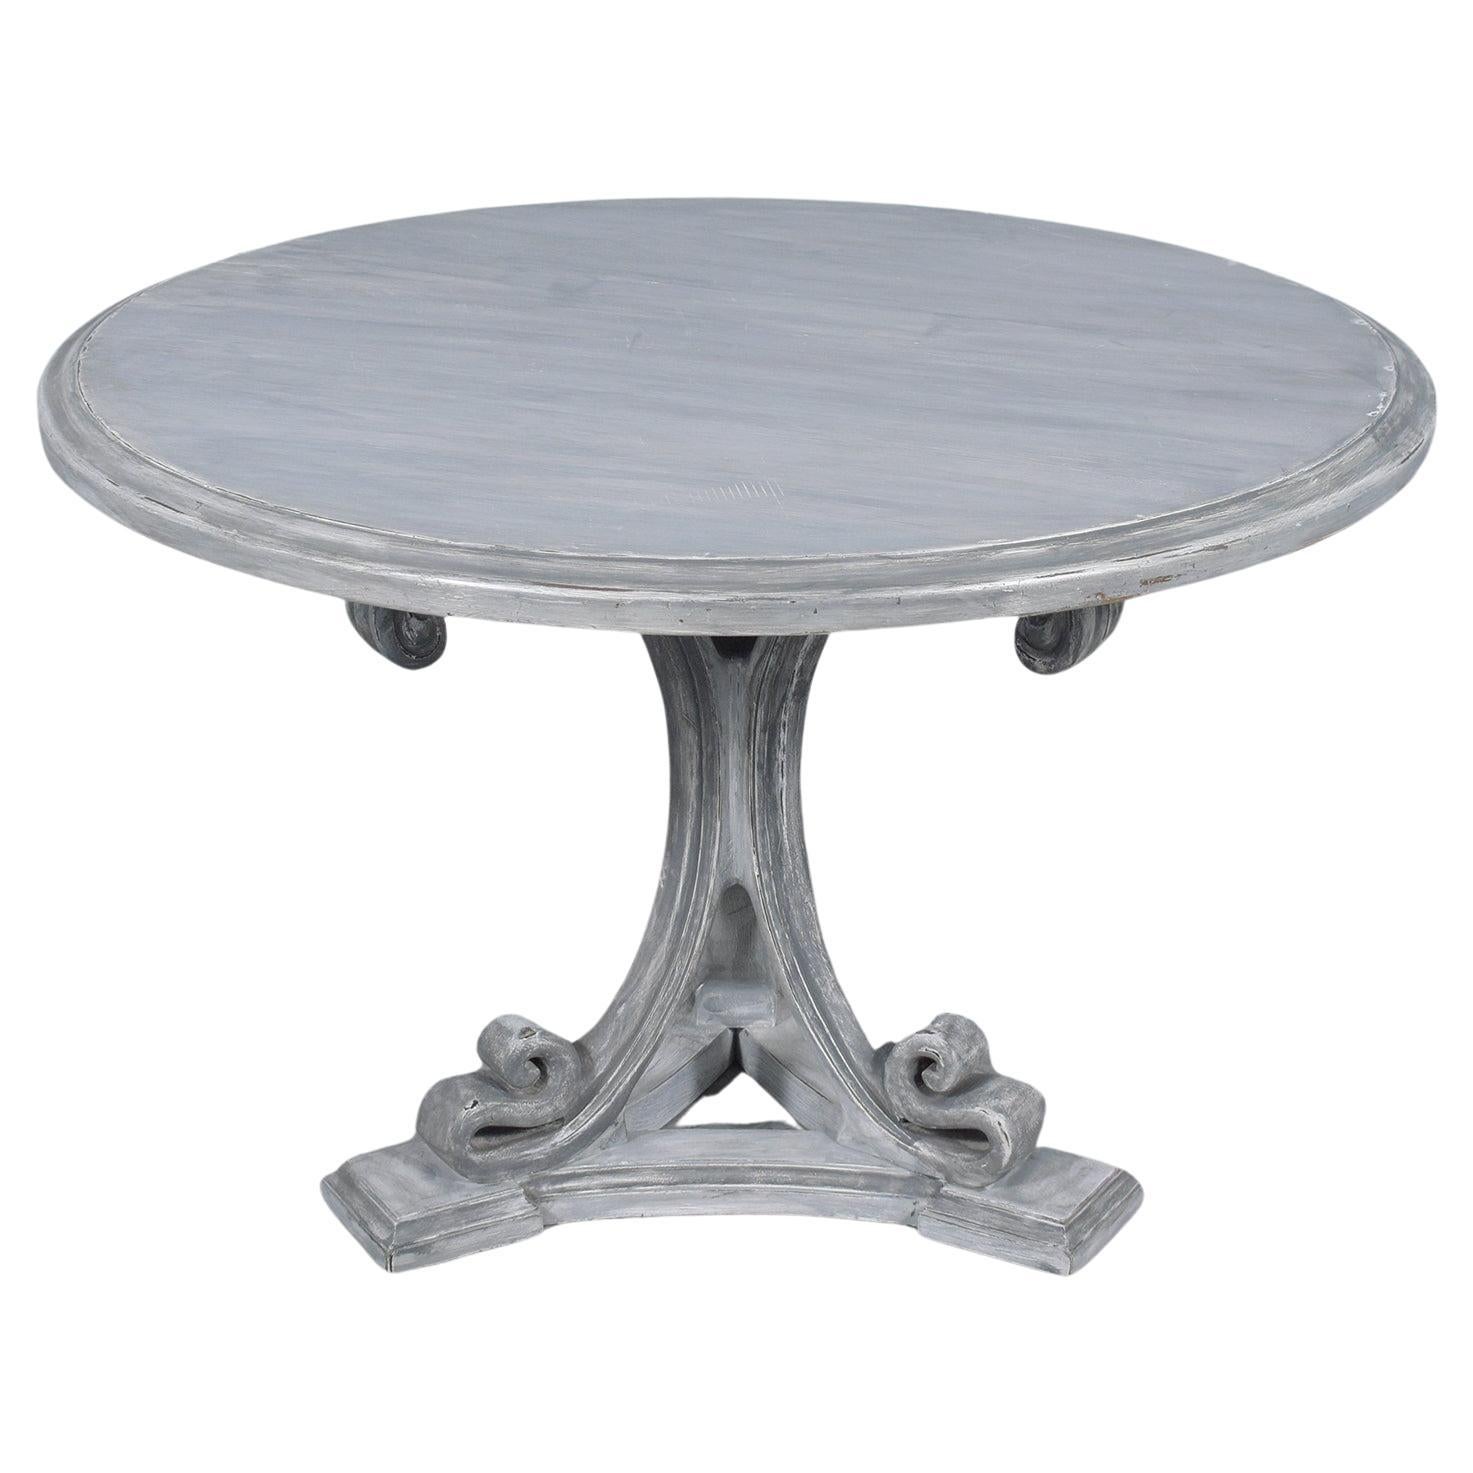 Vintage American Regency Walnut Round Dining Table with Distressed Grey Finish For Sale